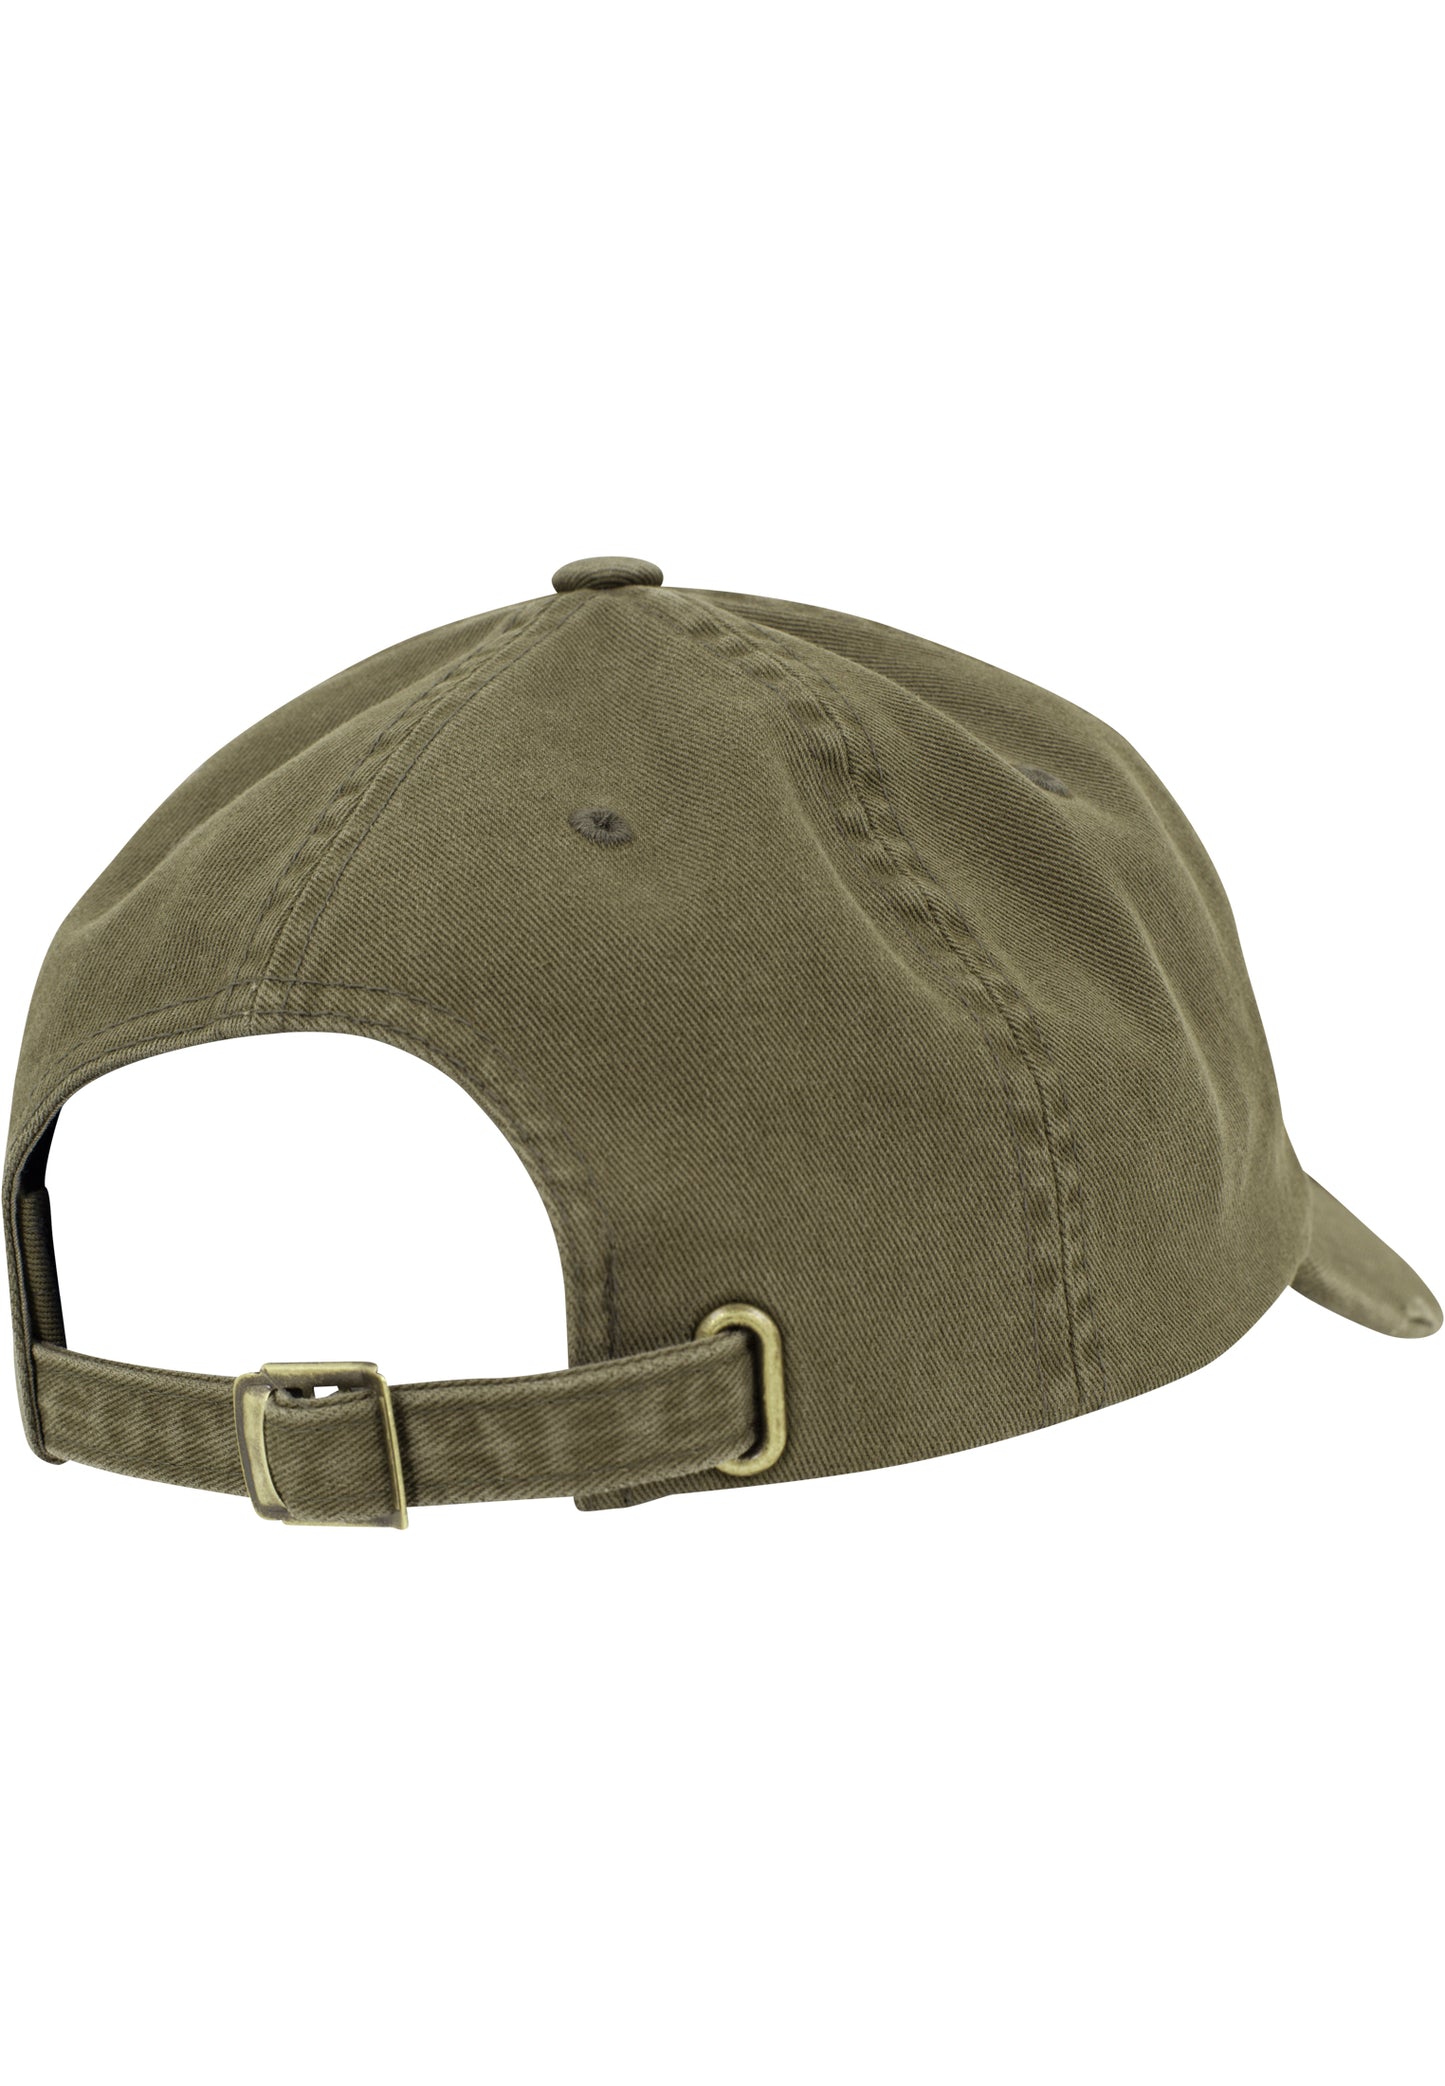 Yupoong Low Profile Destroyed Strapback Cap